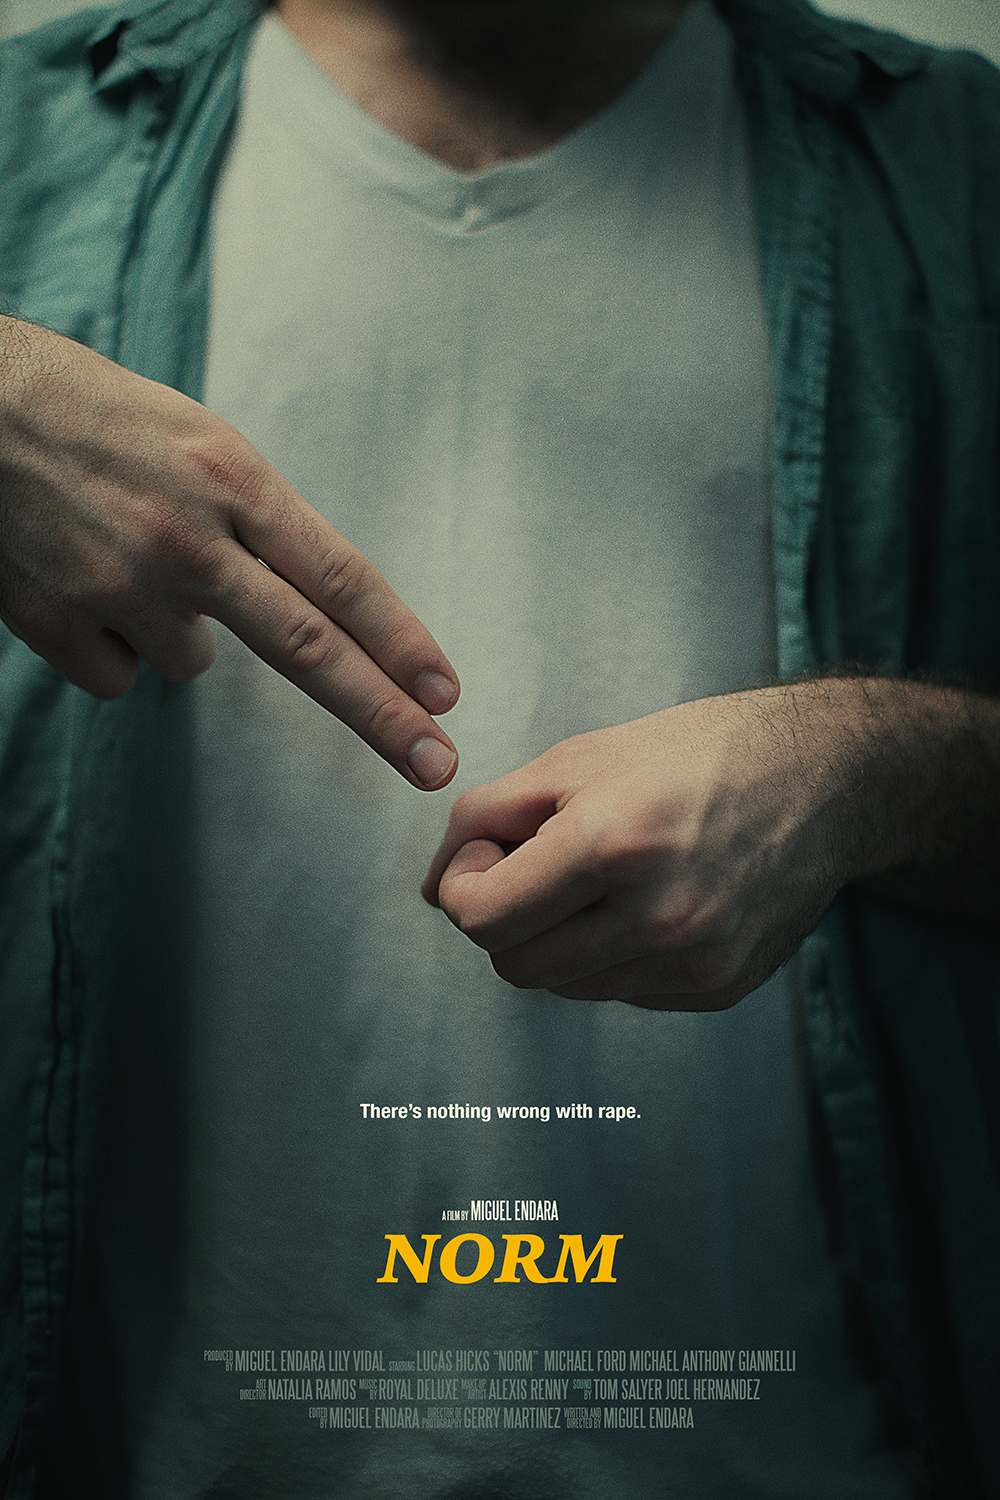 Norm, the Film